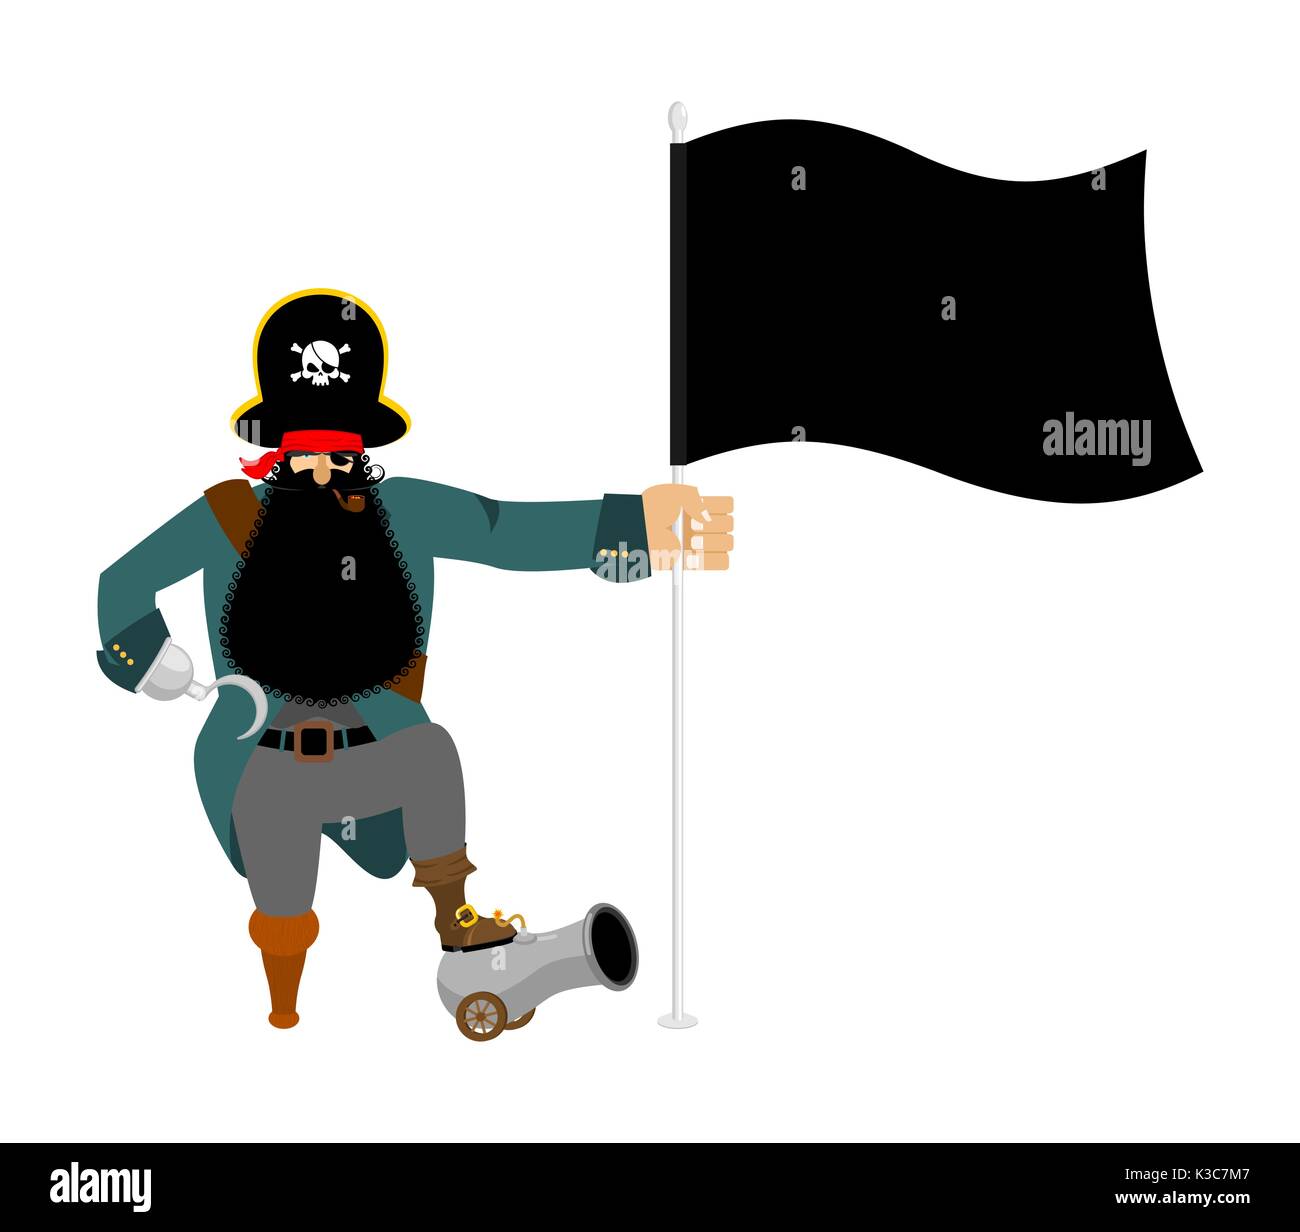 Pirate and flag. Eye patch and smoking pipe. filibuster cap. Bones and Skull. Head corsair black beard. buccaneer Wooden foot Stock Vector